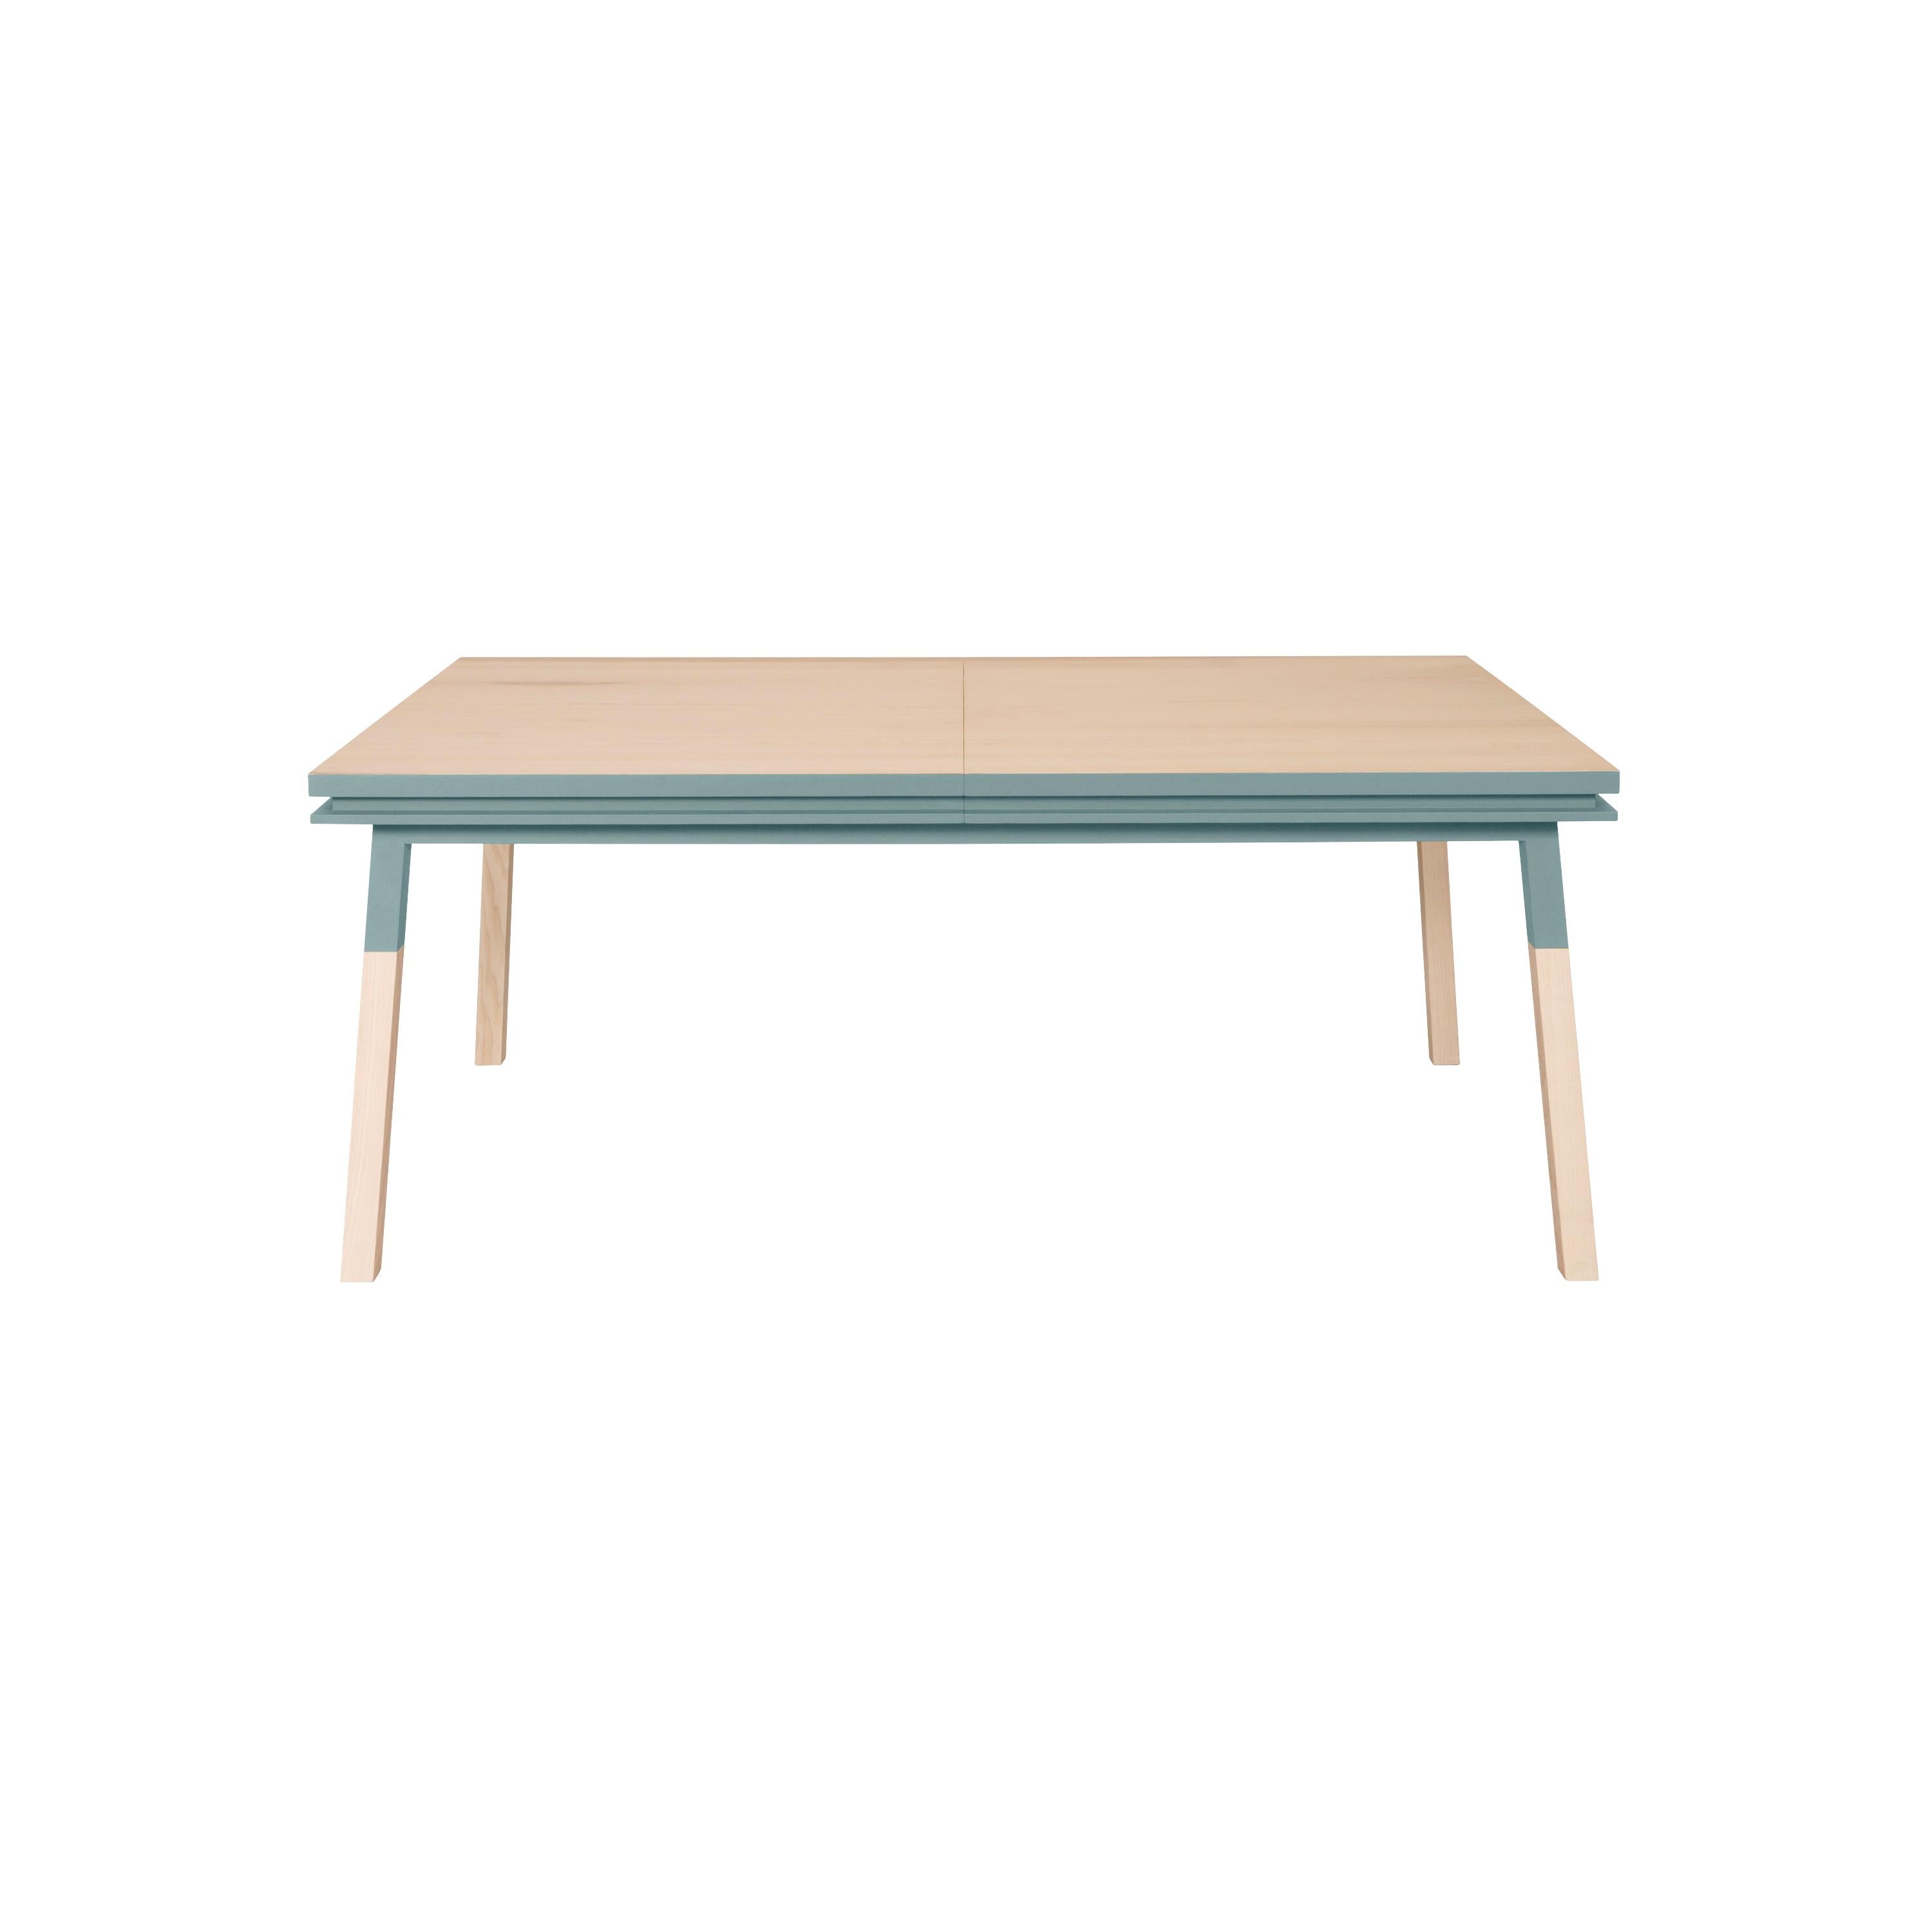 French Blue gray natural solid wood dining table, designed by E. Gizard in Paris For Sale